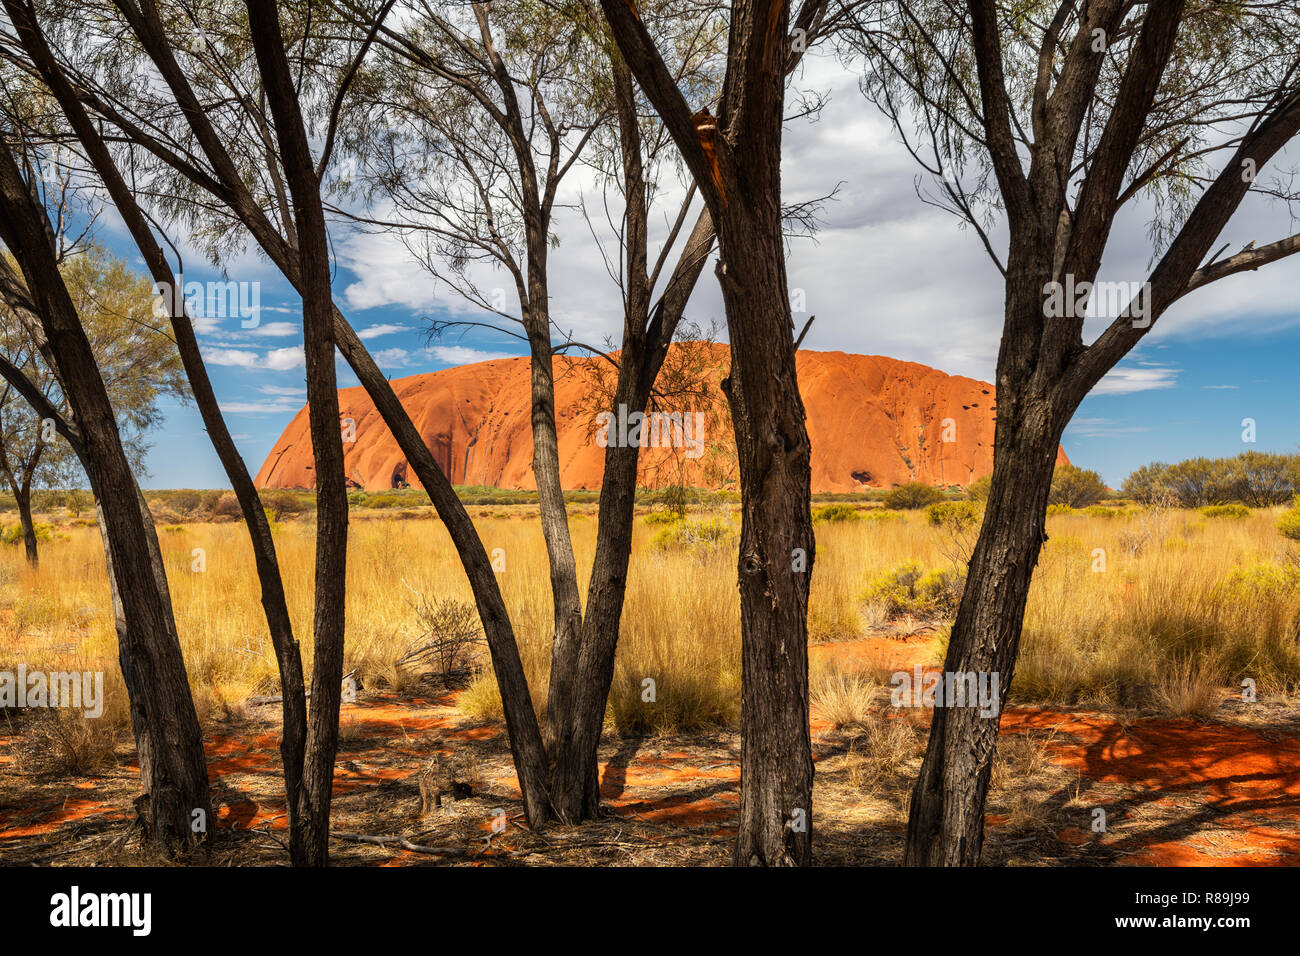 The magnificent and famous Uluru in Australia's Red Centre. Stock Photo